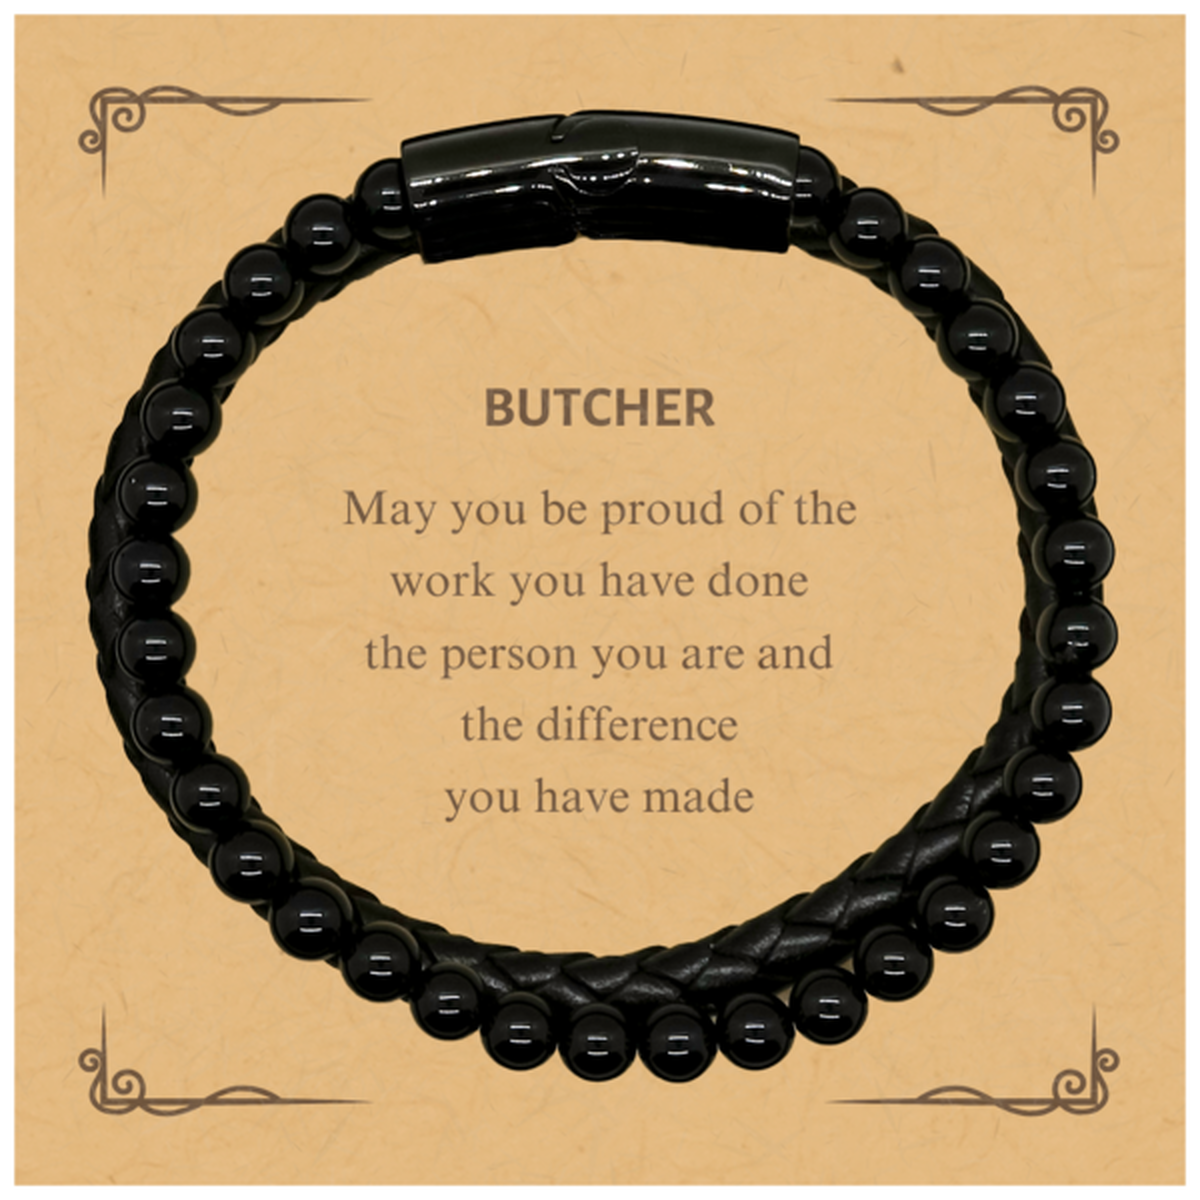 Butcher May you be proud of the work you have done, Retirement Butcher Stone Leather Bracelets for Colleague Appreciation Gifts Amazing for Butcher